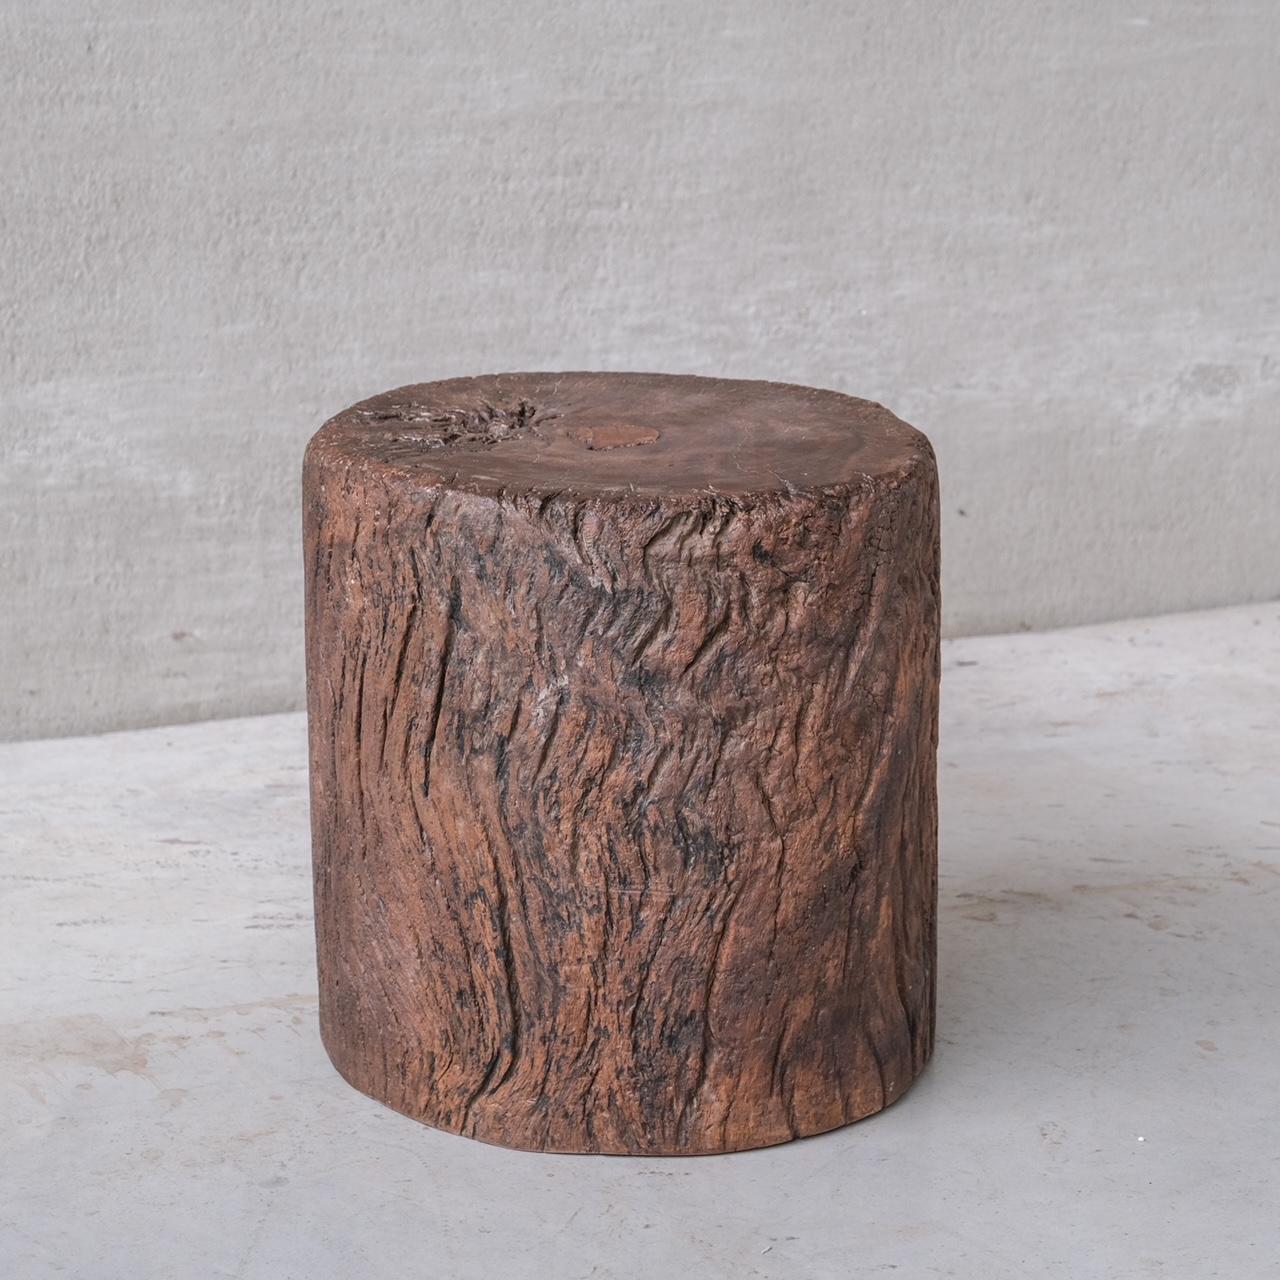 A primitive wooden (likely oak) side table or low pedestal.

Ideal as a primitive natural wabi-sabi esque side table or alternatively a display for art or sculpture.

France, c1930s.

Good vintage condition.

As found.

One of two available, the